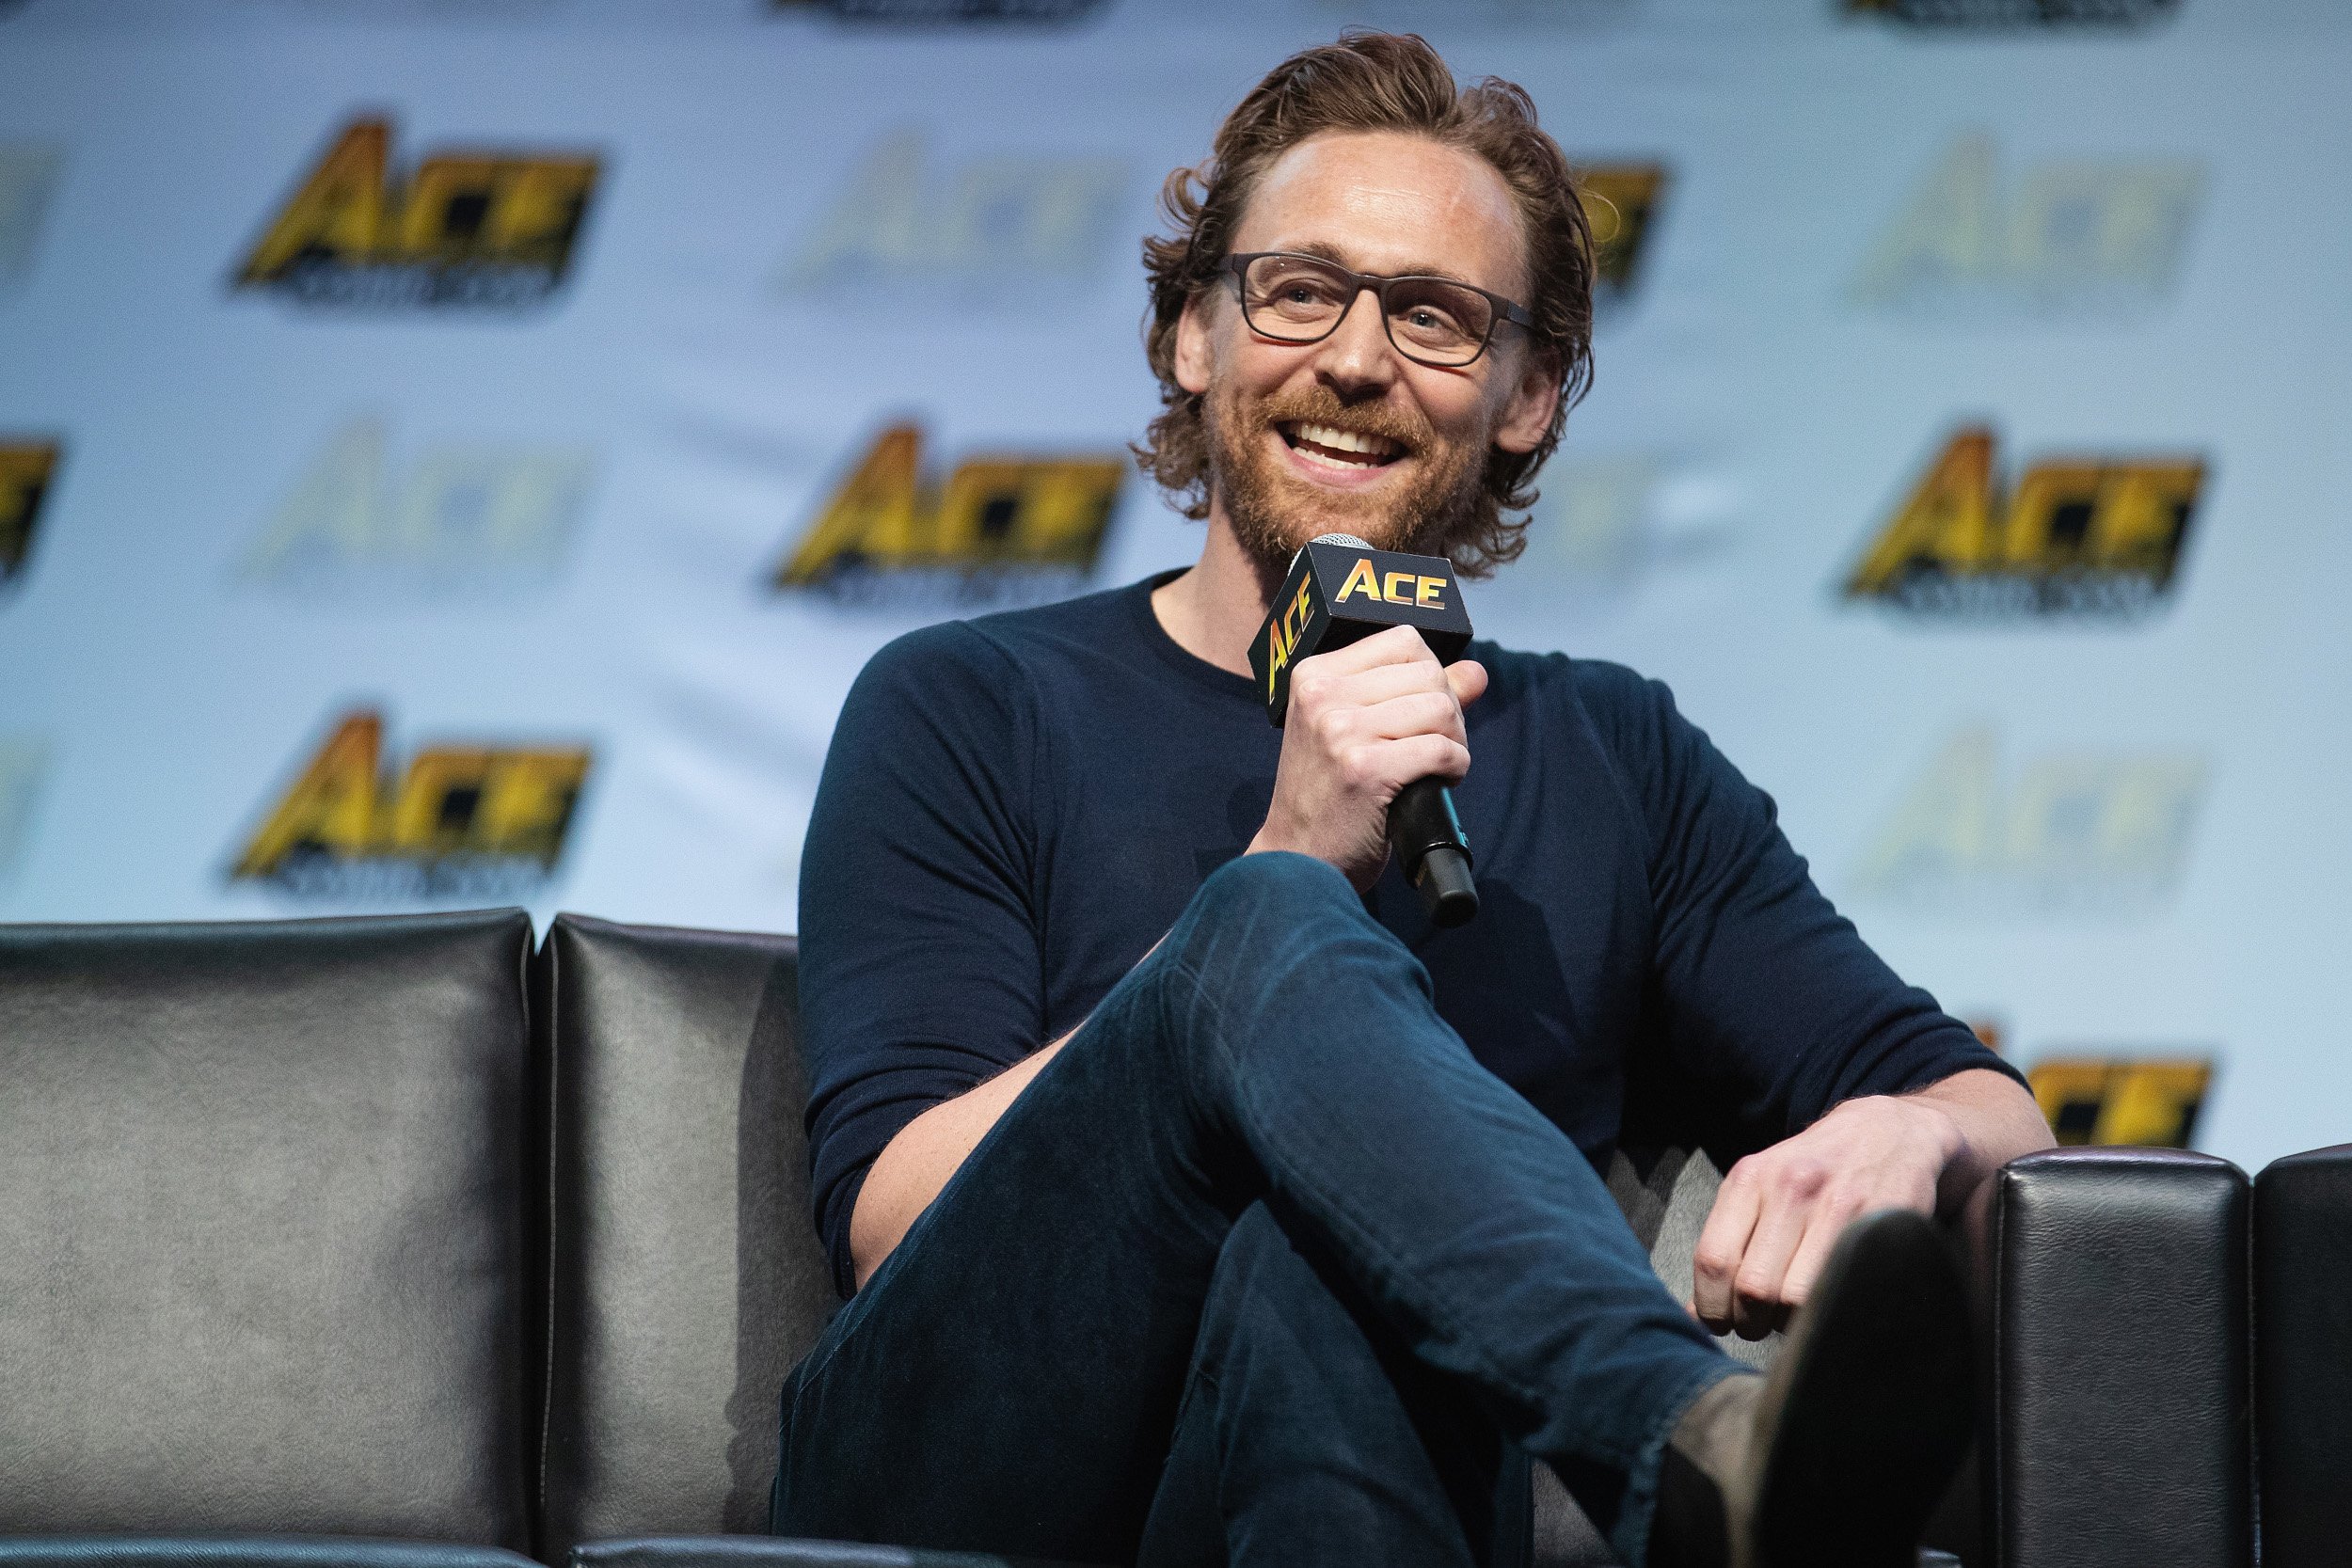 'Loki' star Tom Hiddleston wearing glasses and crossing his legs while speaking into a microphone